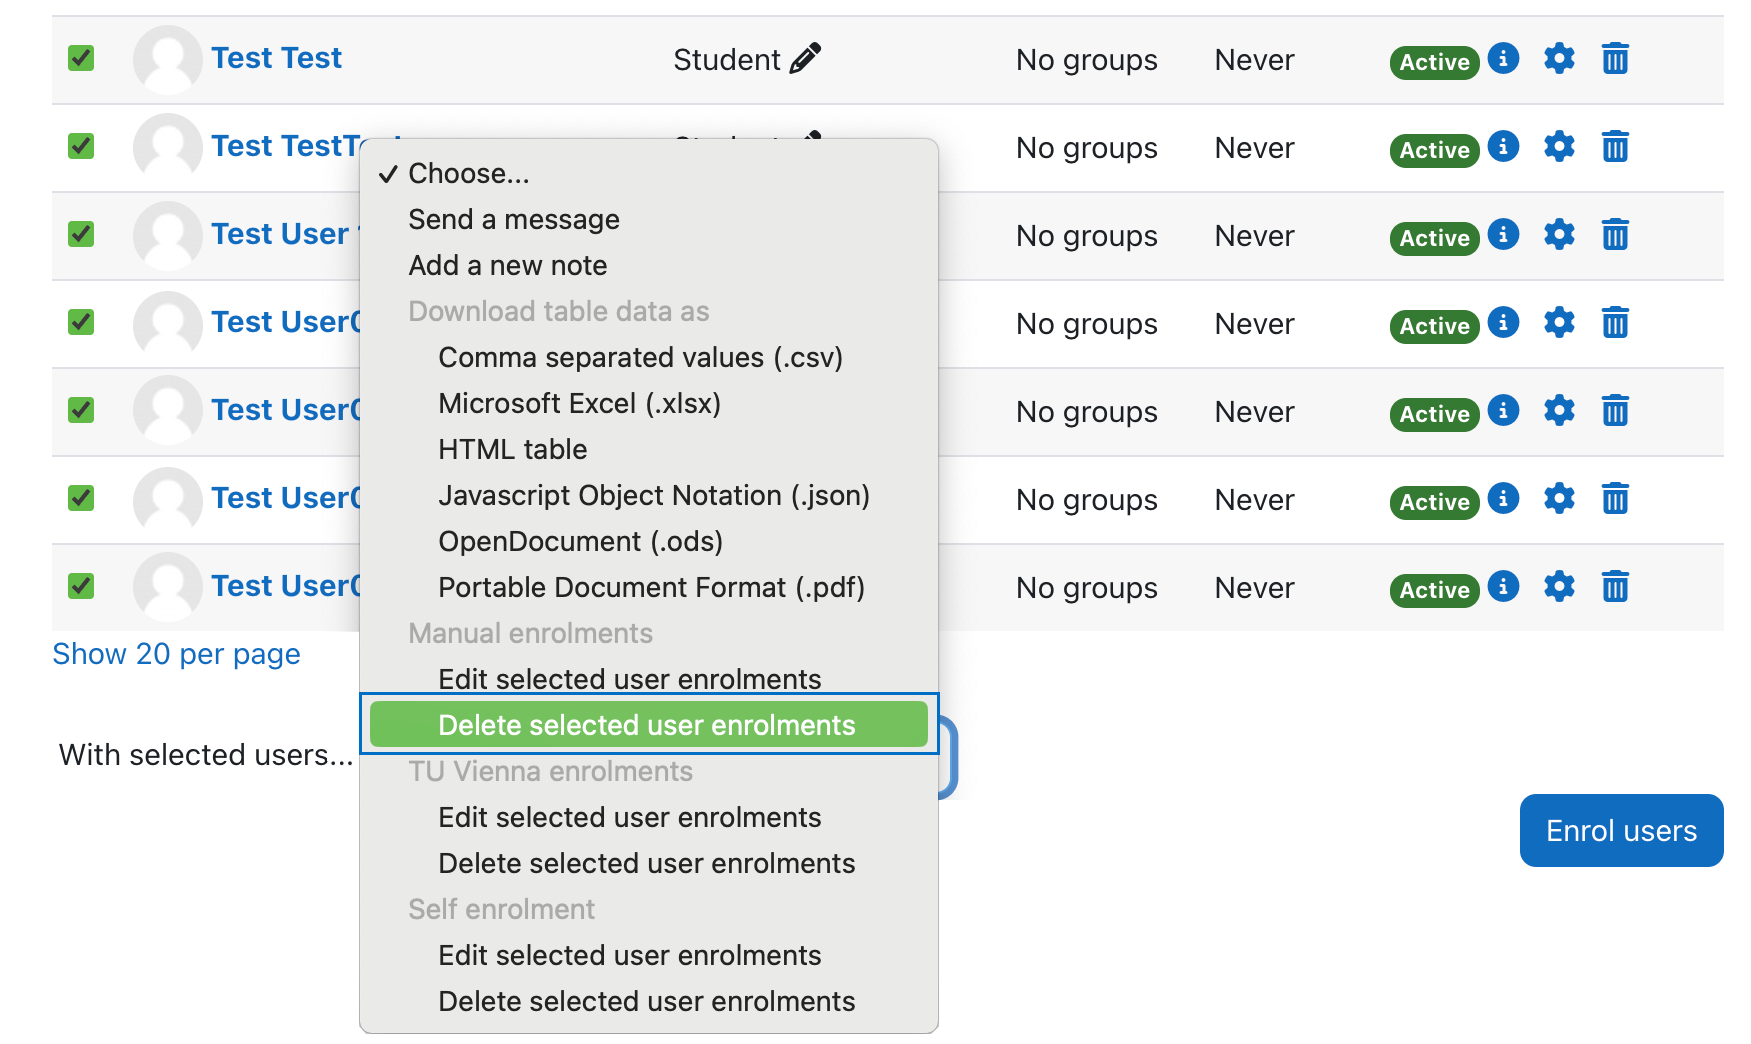 Choose the option delete selected user enrolments in the drop-down menu